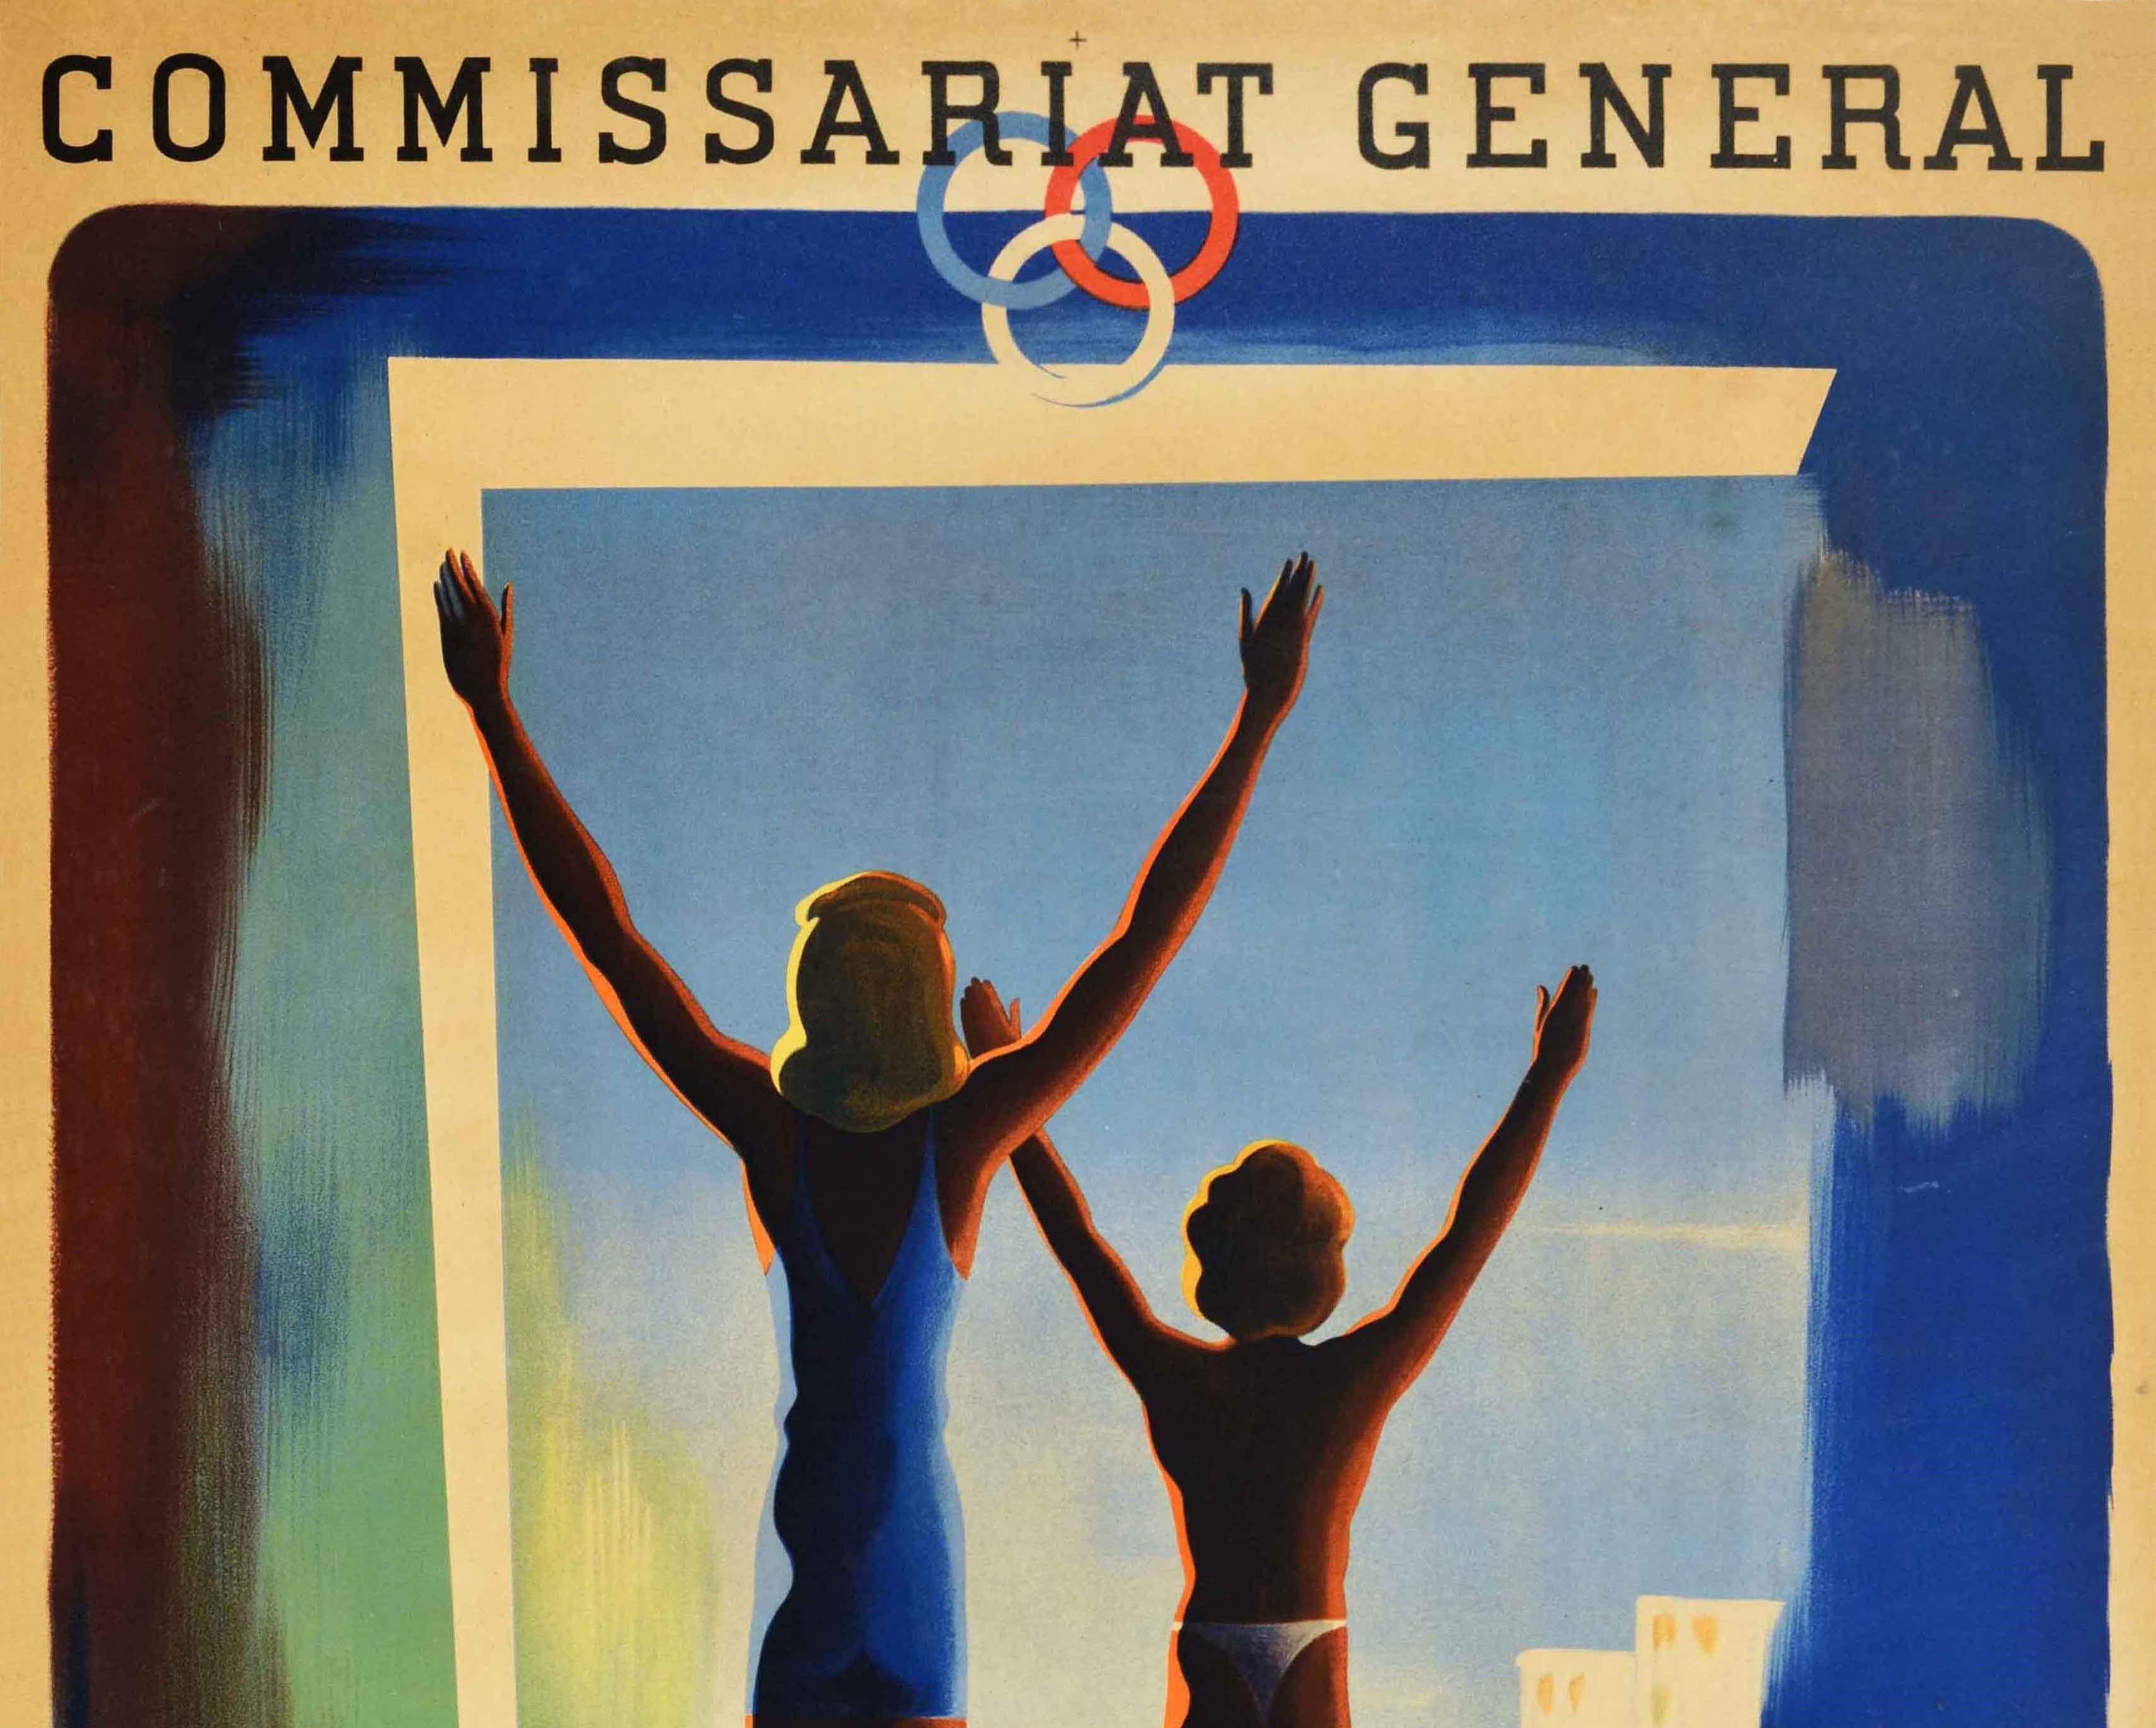 Original vintage sport and health propaganda poster issued by the General Commission for General Education and Sports - Une Fenetre ouverte sur la vie / An open window on life - featuring a great image by Jean Jacquelin (1905-1989) of two people